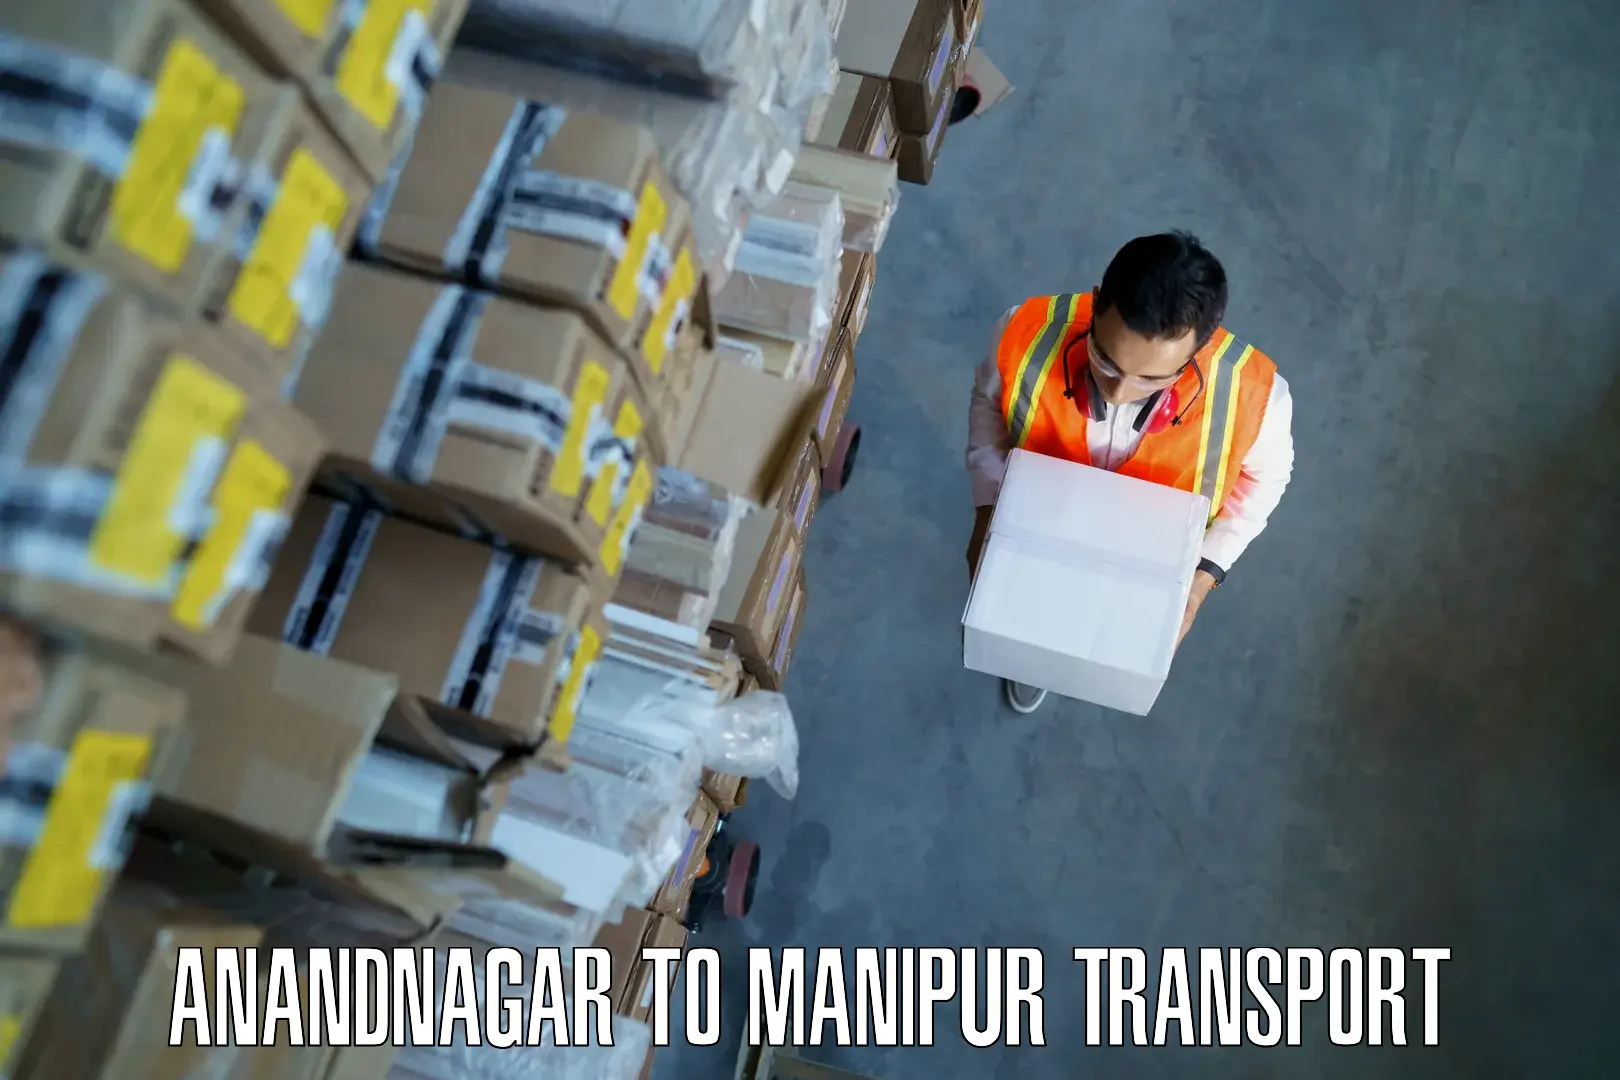 Daily transport service in Anandnagar to Manipur